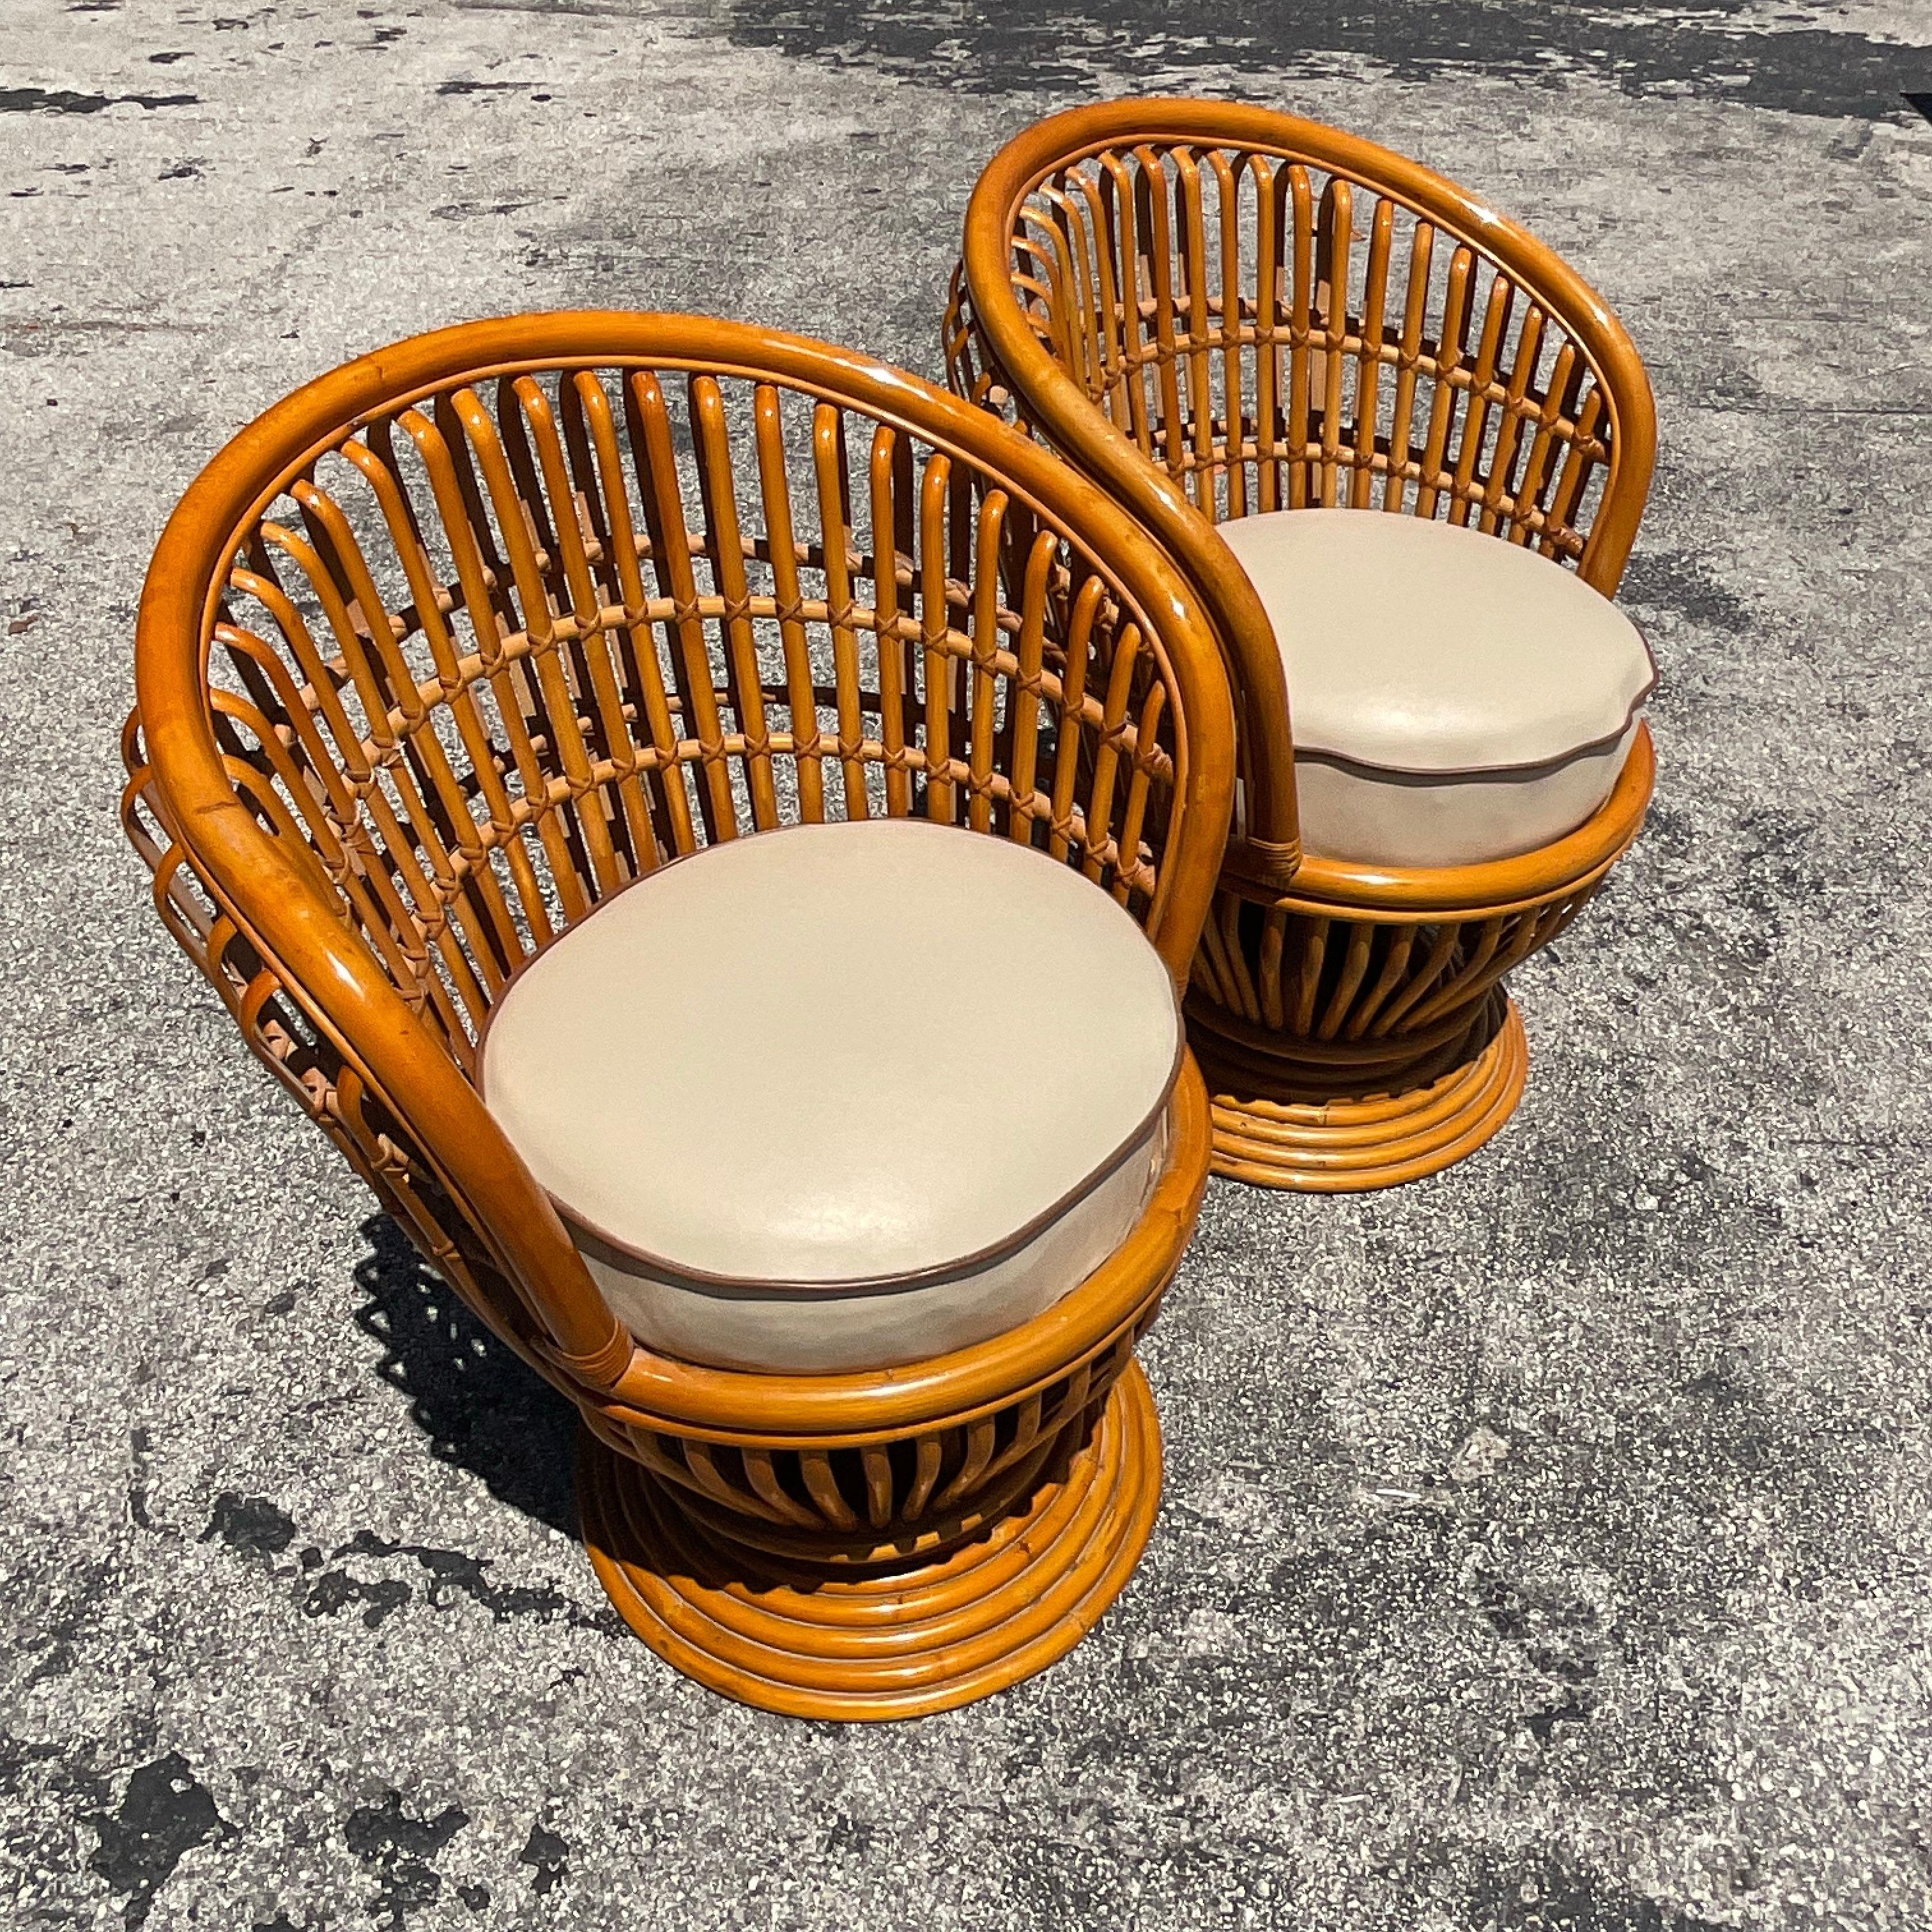 A fantastic pair of vintage Coastal swivel chairs. A chic bent rattan tub shape with a custom leather cushion. Done in the manner of Franco Albini. Acquired from a Palm Beach estate.